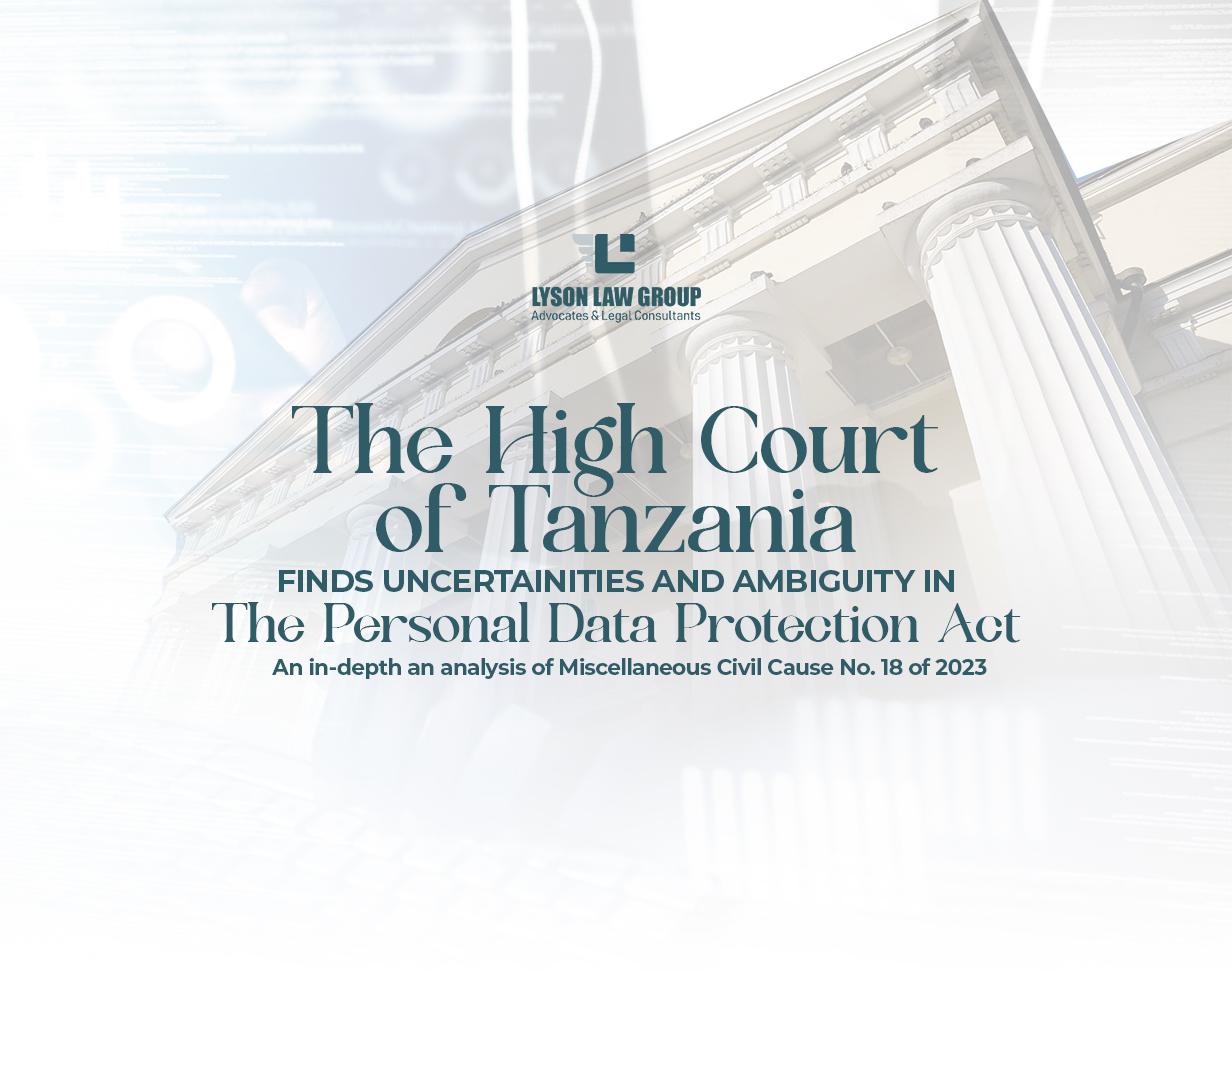 The High Court of Tanzania Finds Uncertainities and Ambiguity in the personal Data Protection Act, 2022